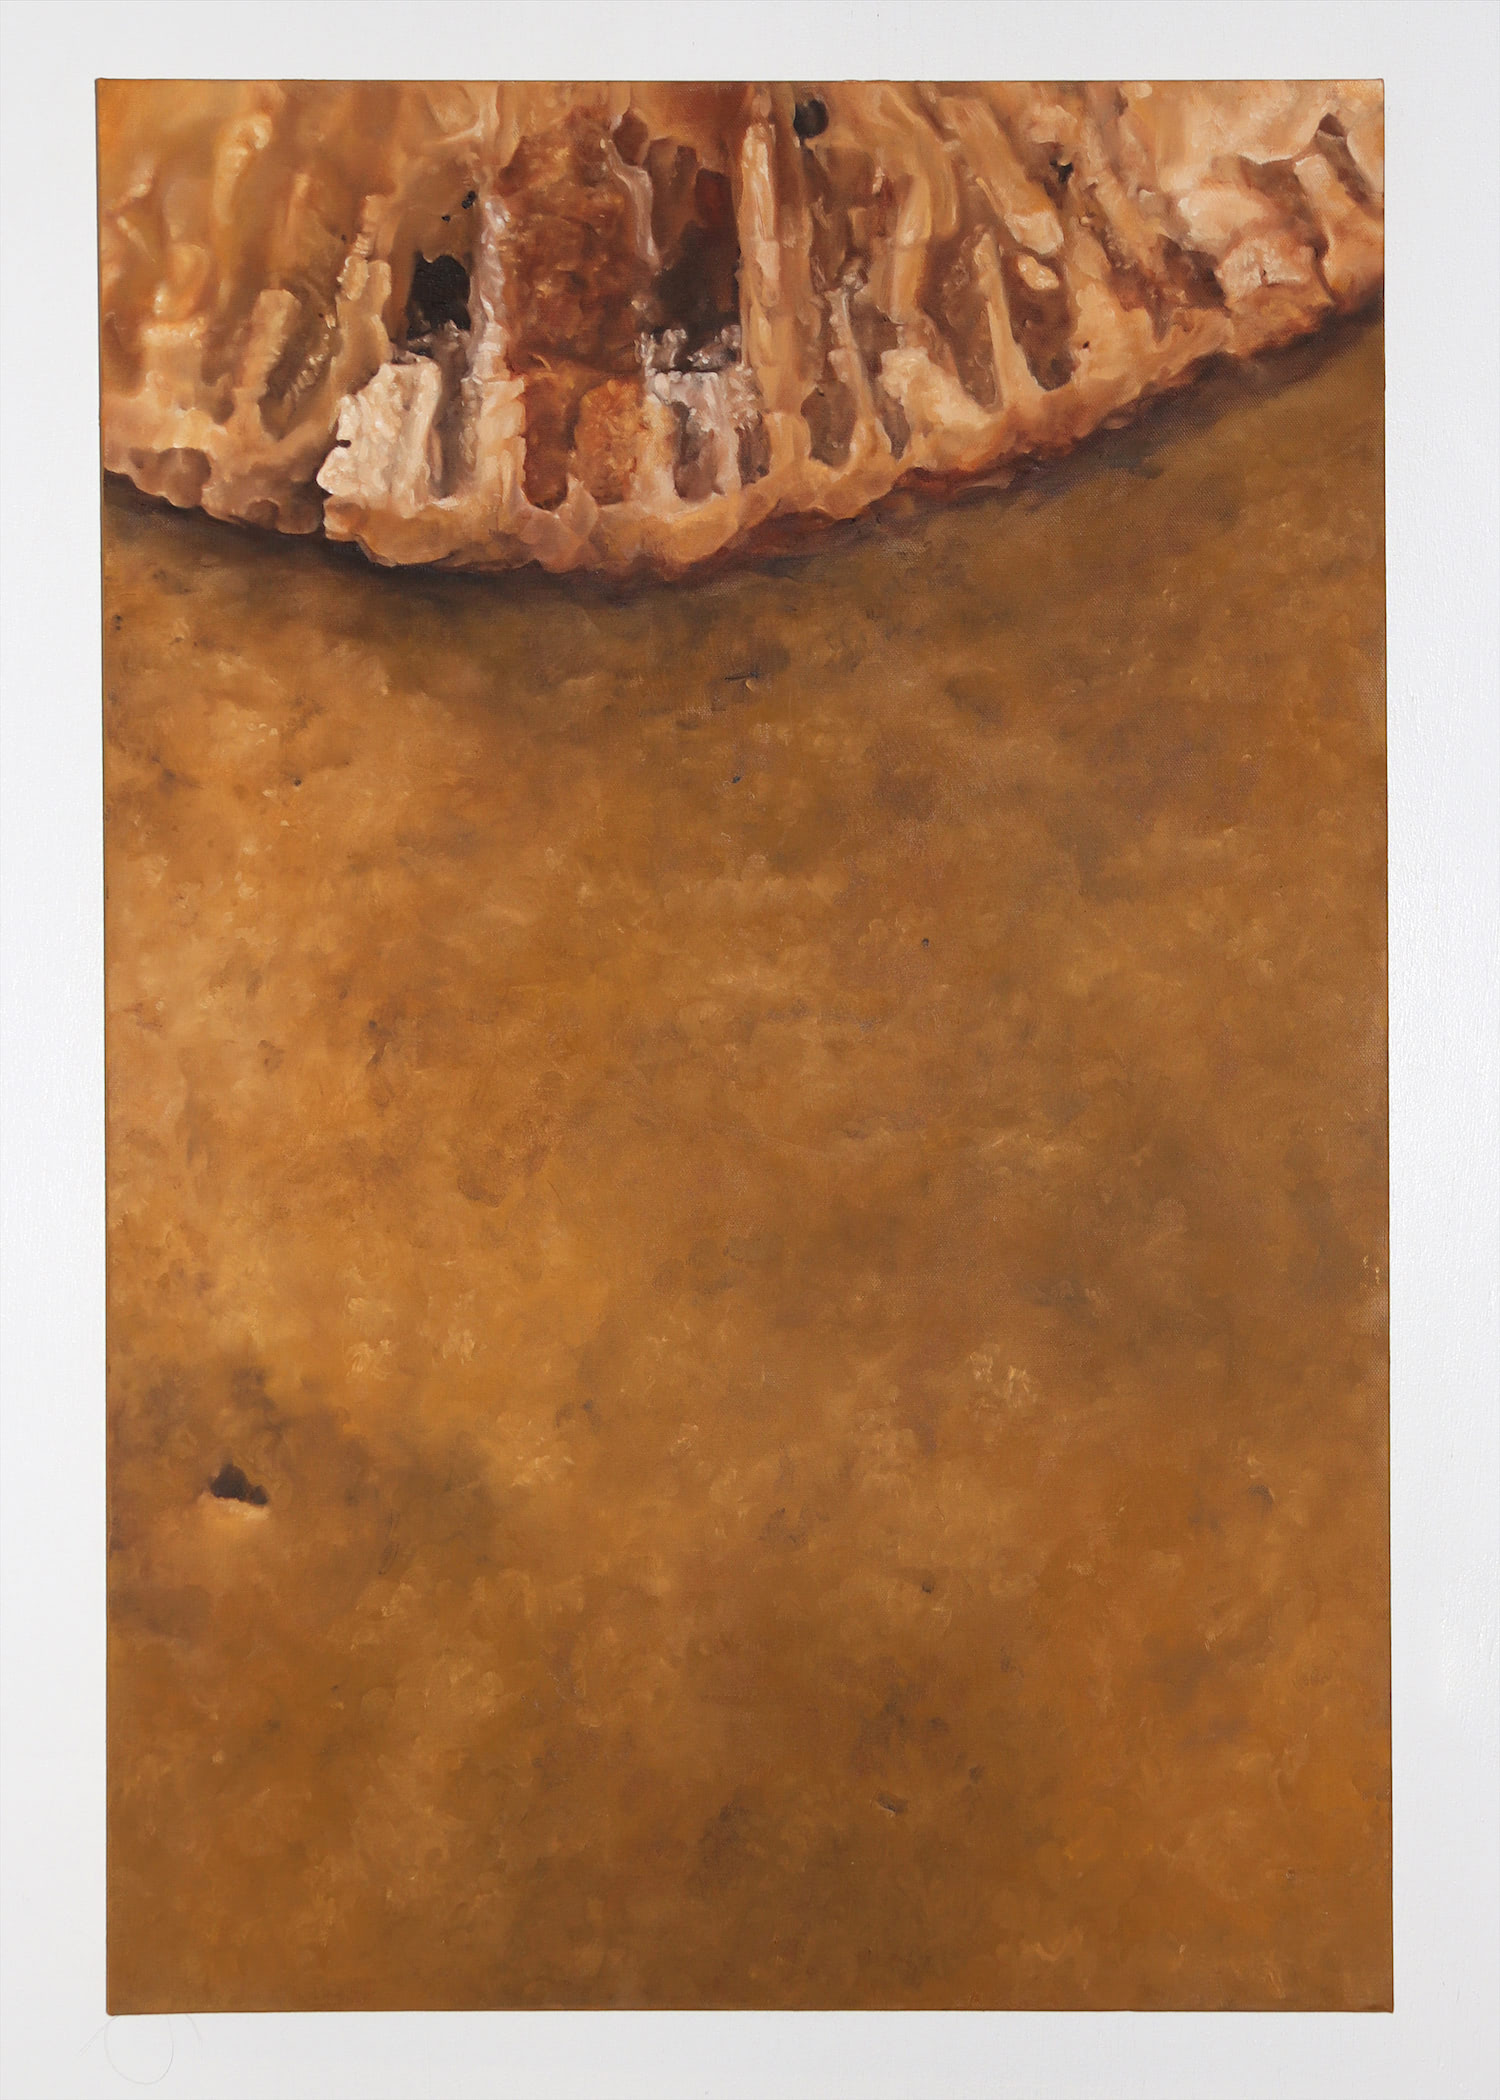 A fragment of a Horn Coral fossil embedded in a yellow colored rock painted on a vertical, rectangular canvas.